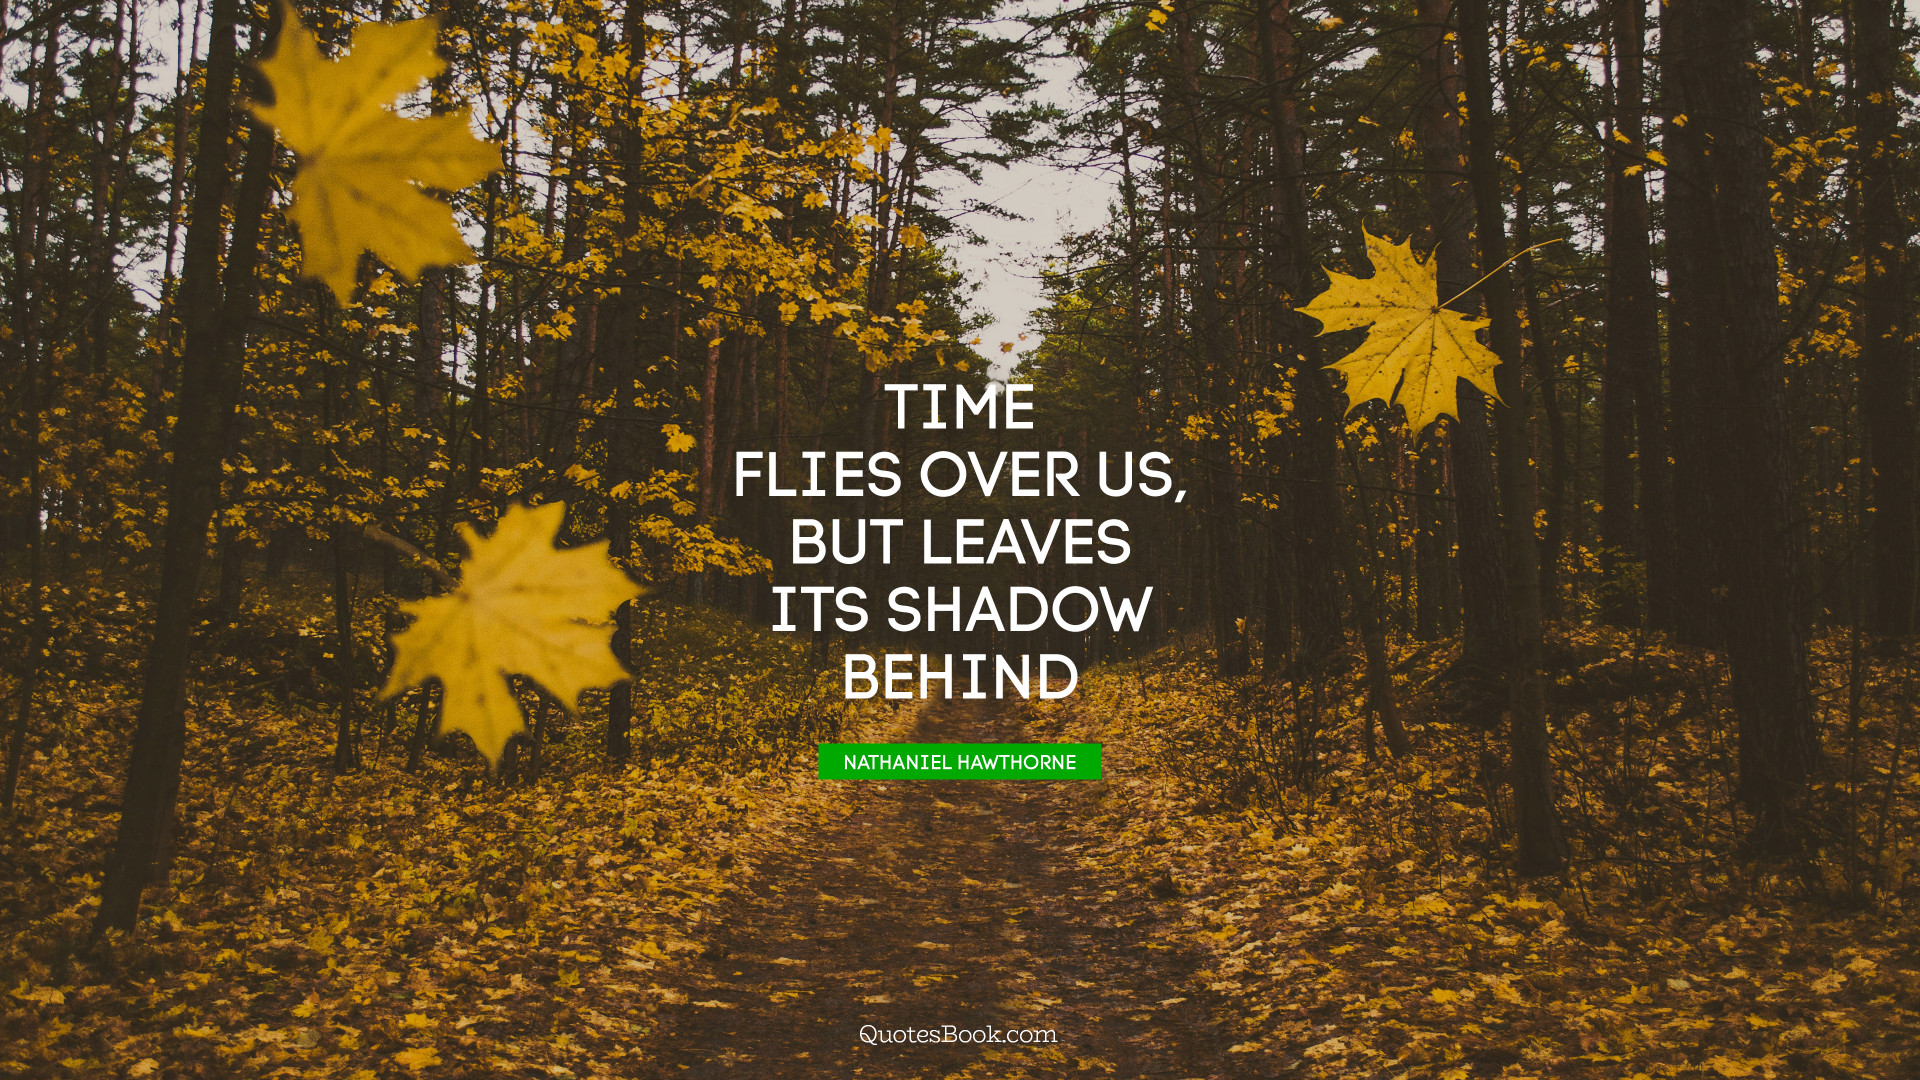 Time flies over us, but leaves its shadow behind. - Quote by Nathaniel